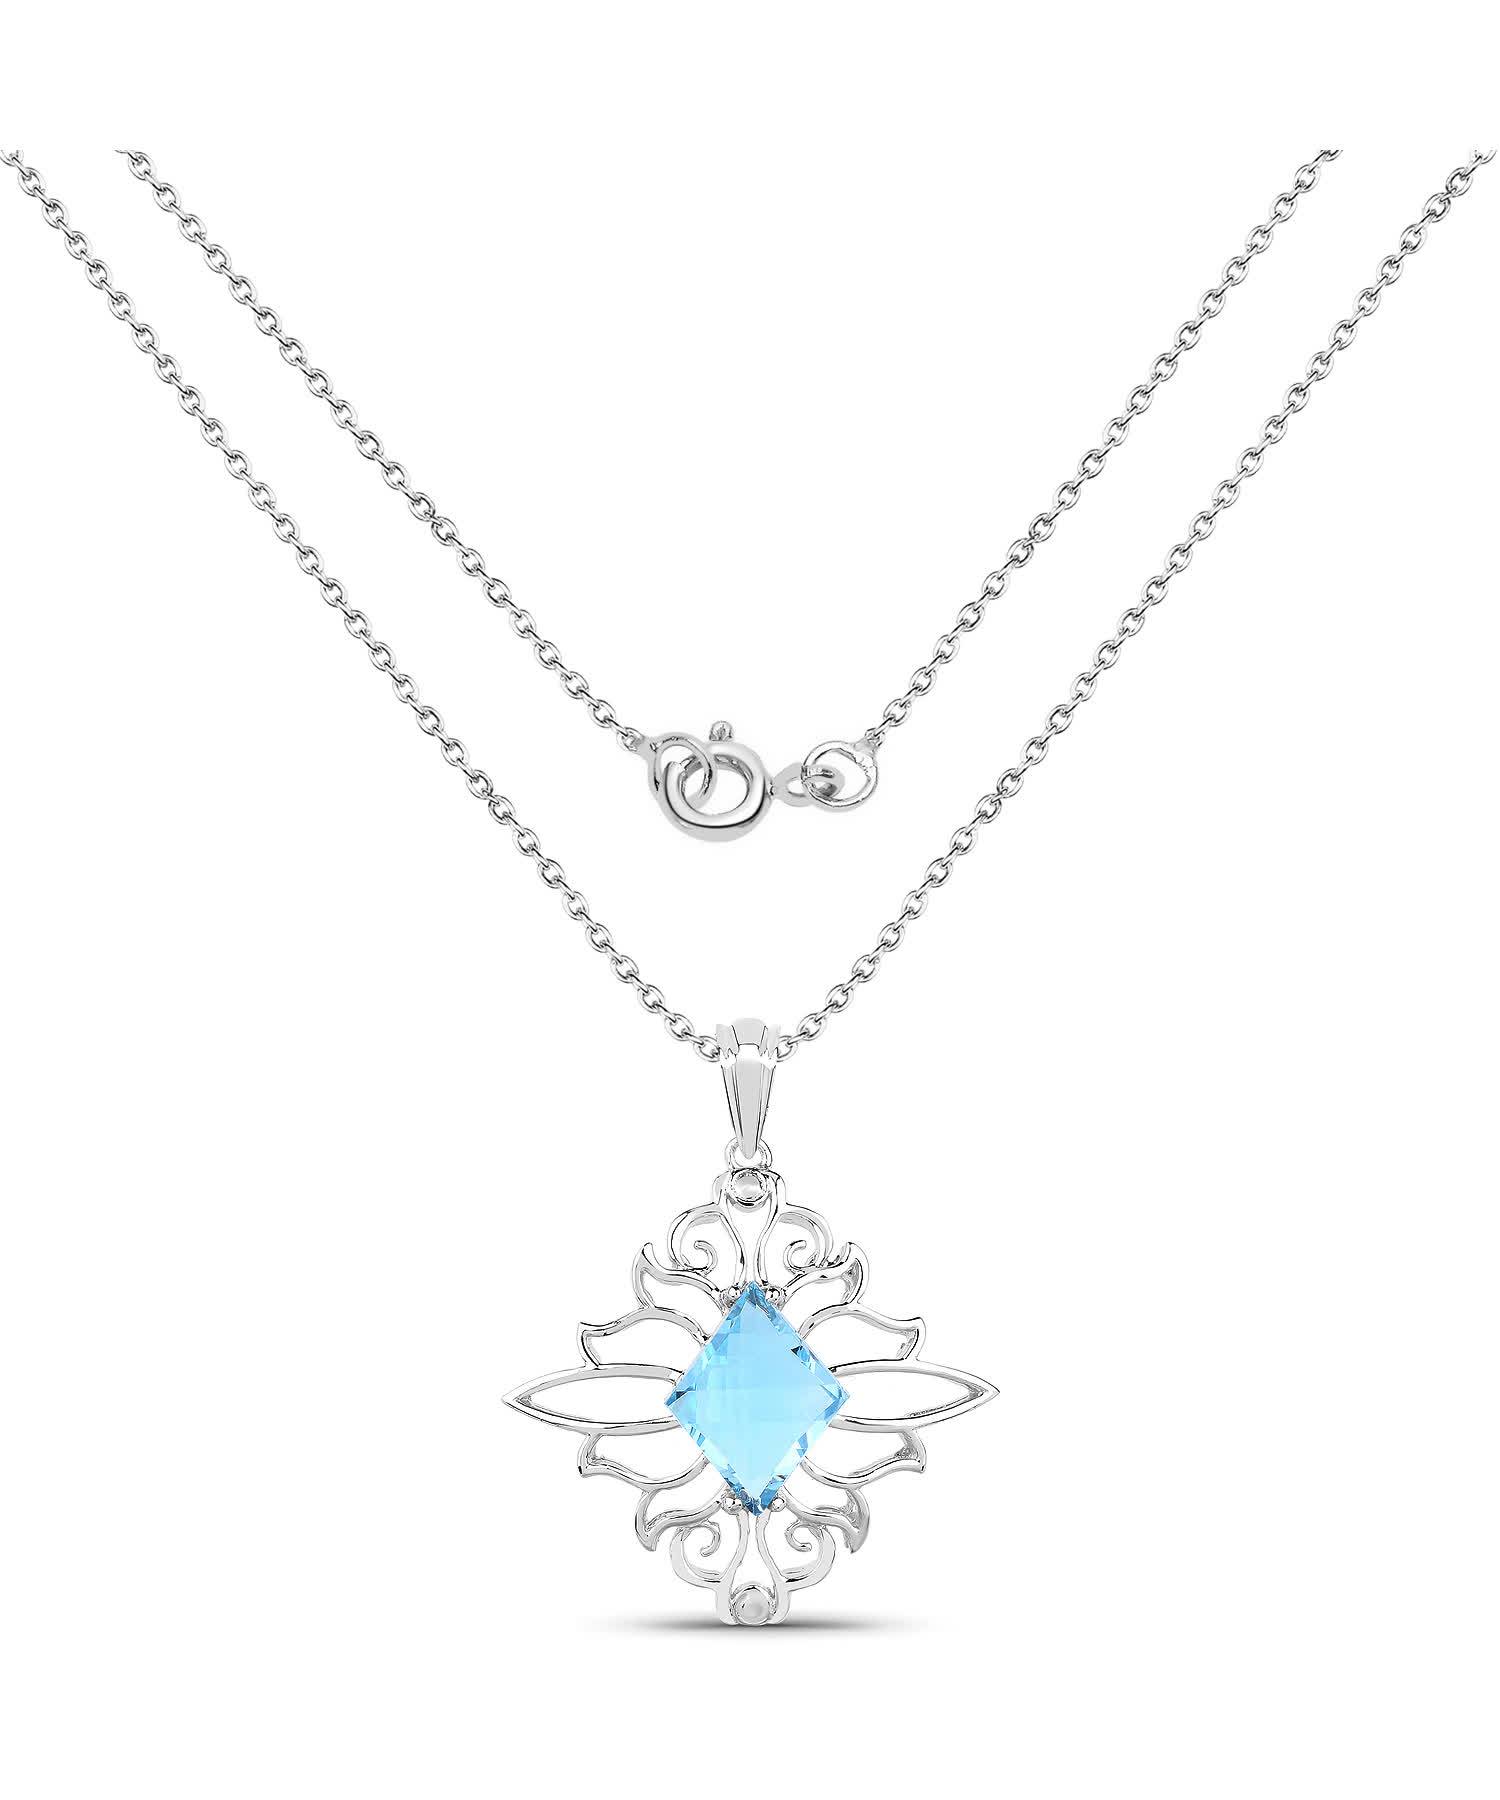 5.15ctw Natural Swiss Blue Topaz Rhodium Plated 925 Sterling Silver Pendant With Chain View 2